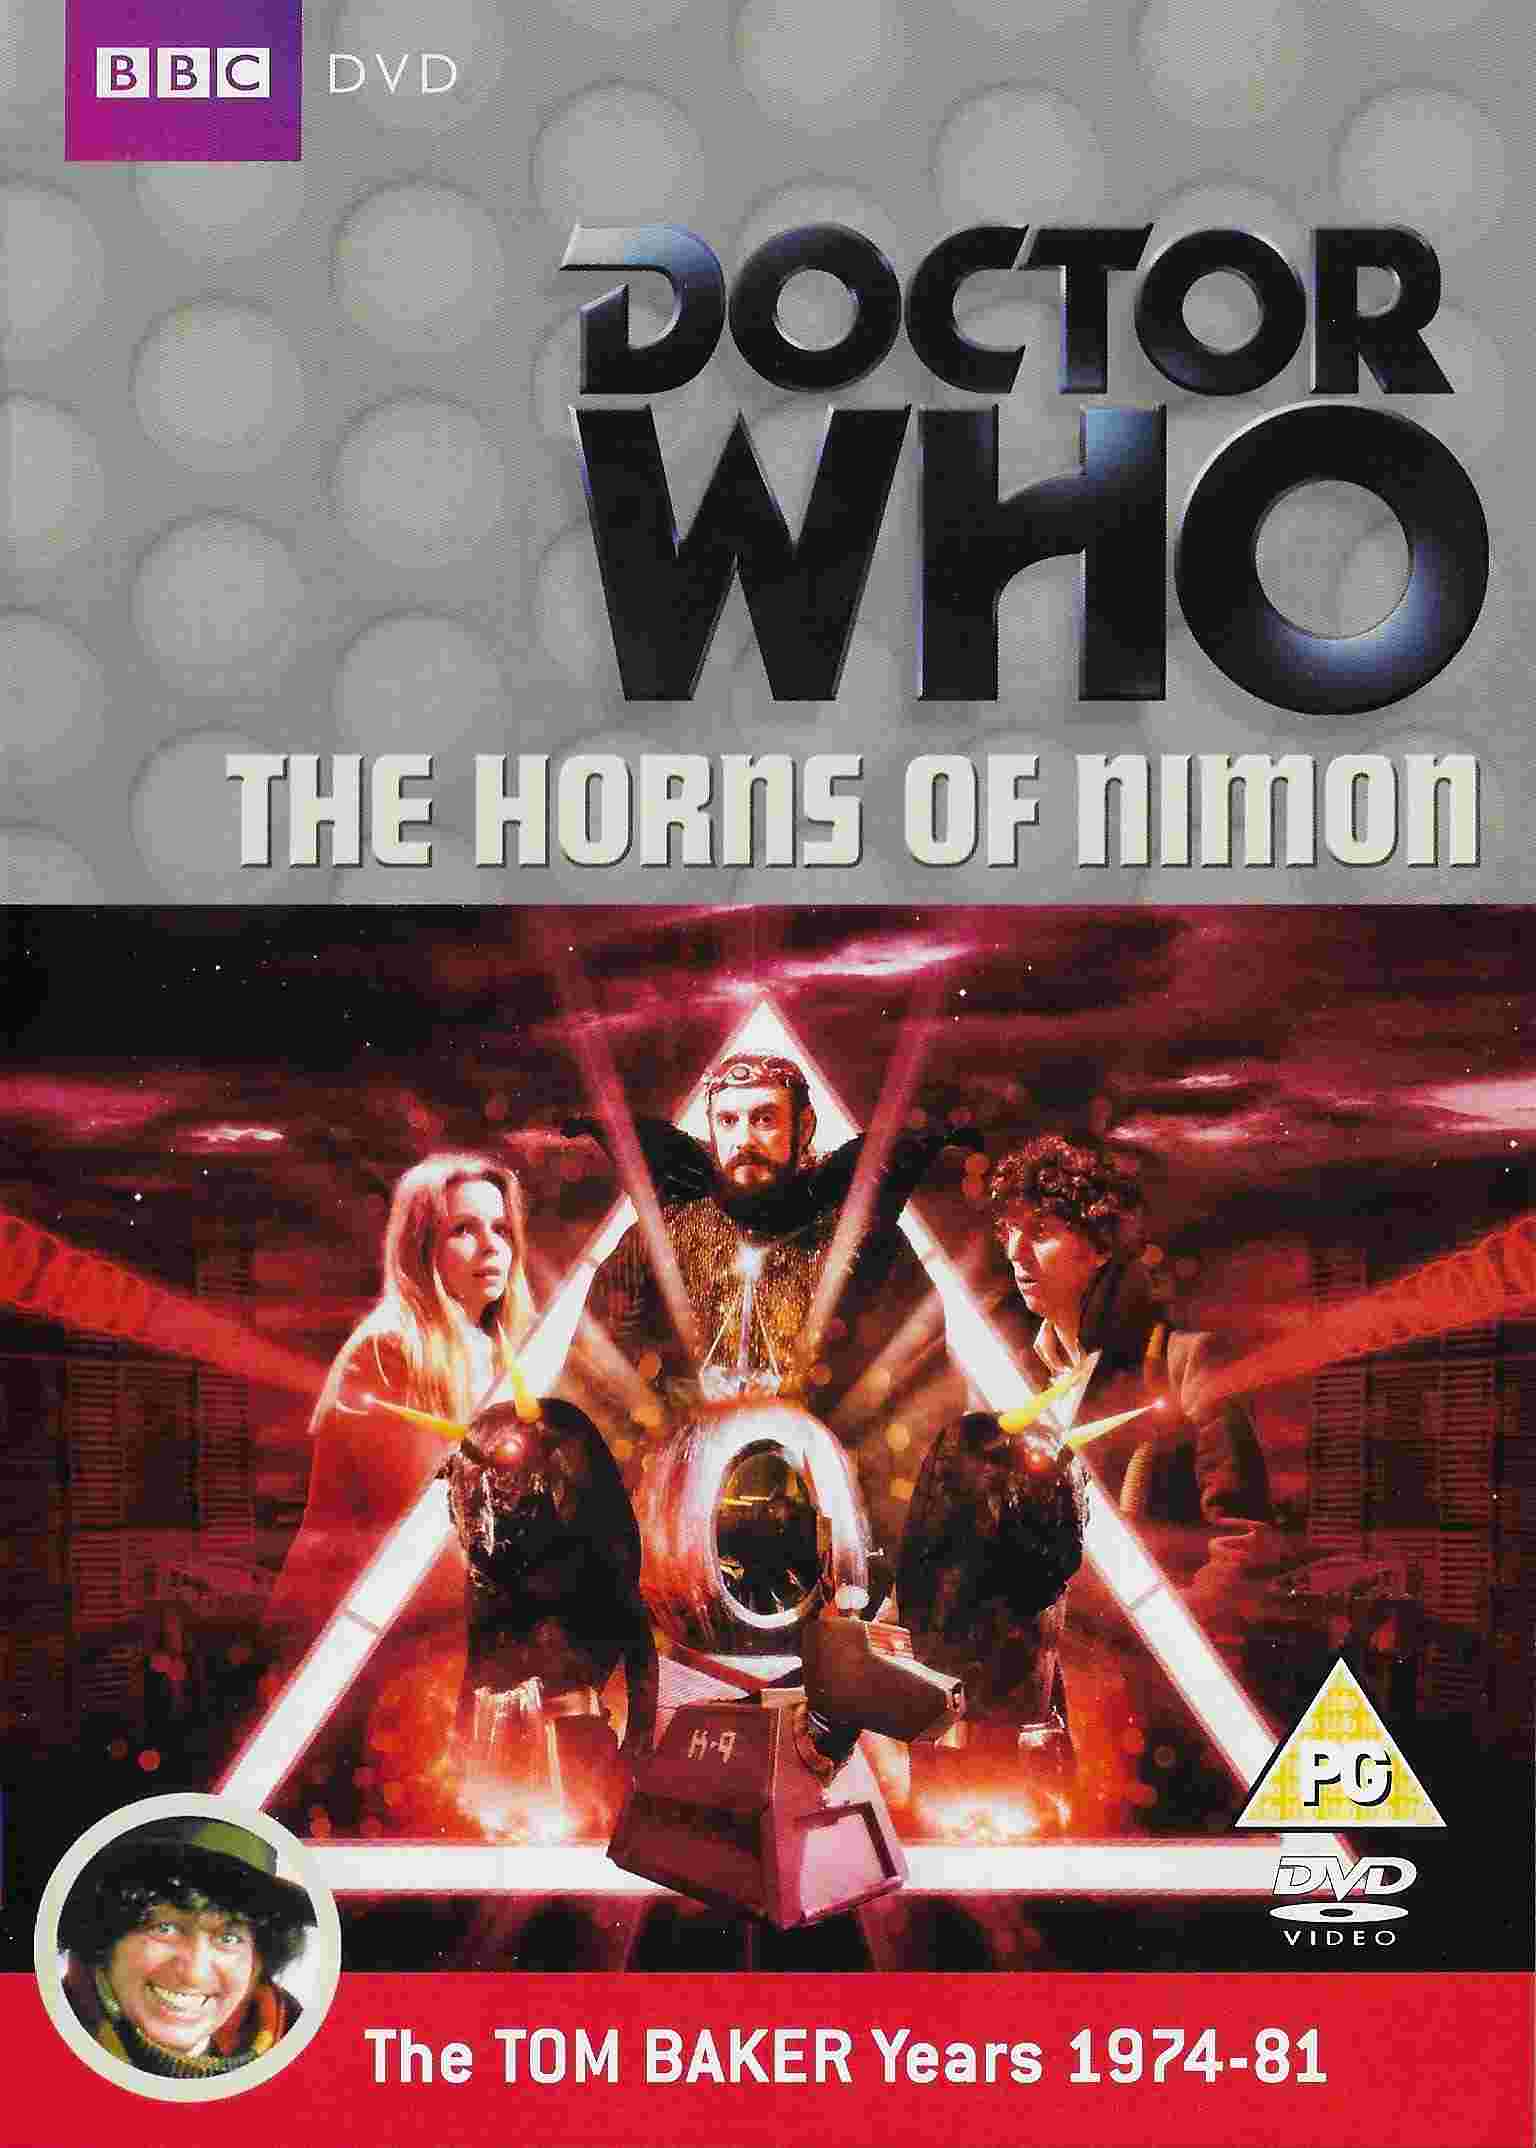 Picture of BBCDVD 2851C Doctor Who - The horns of Nimon by artist Anthony Read from the BBC dvds - Records and Tapes library